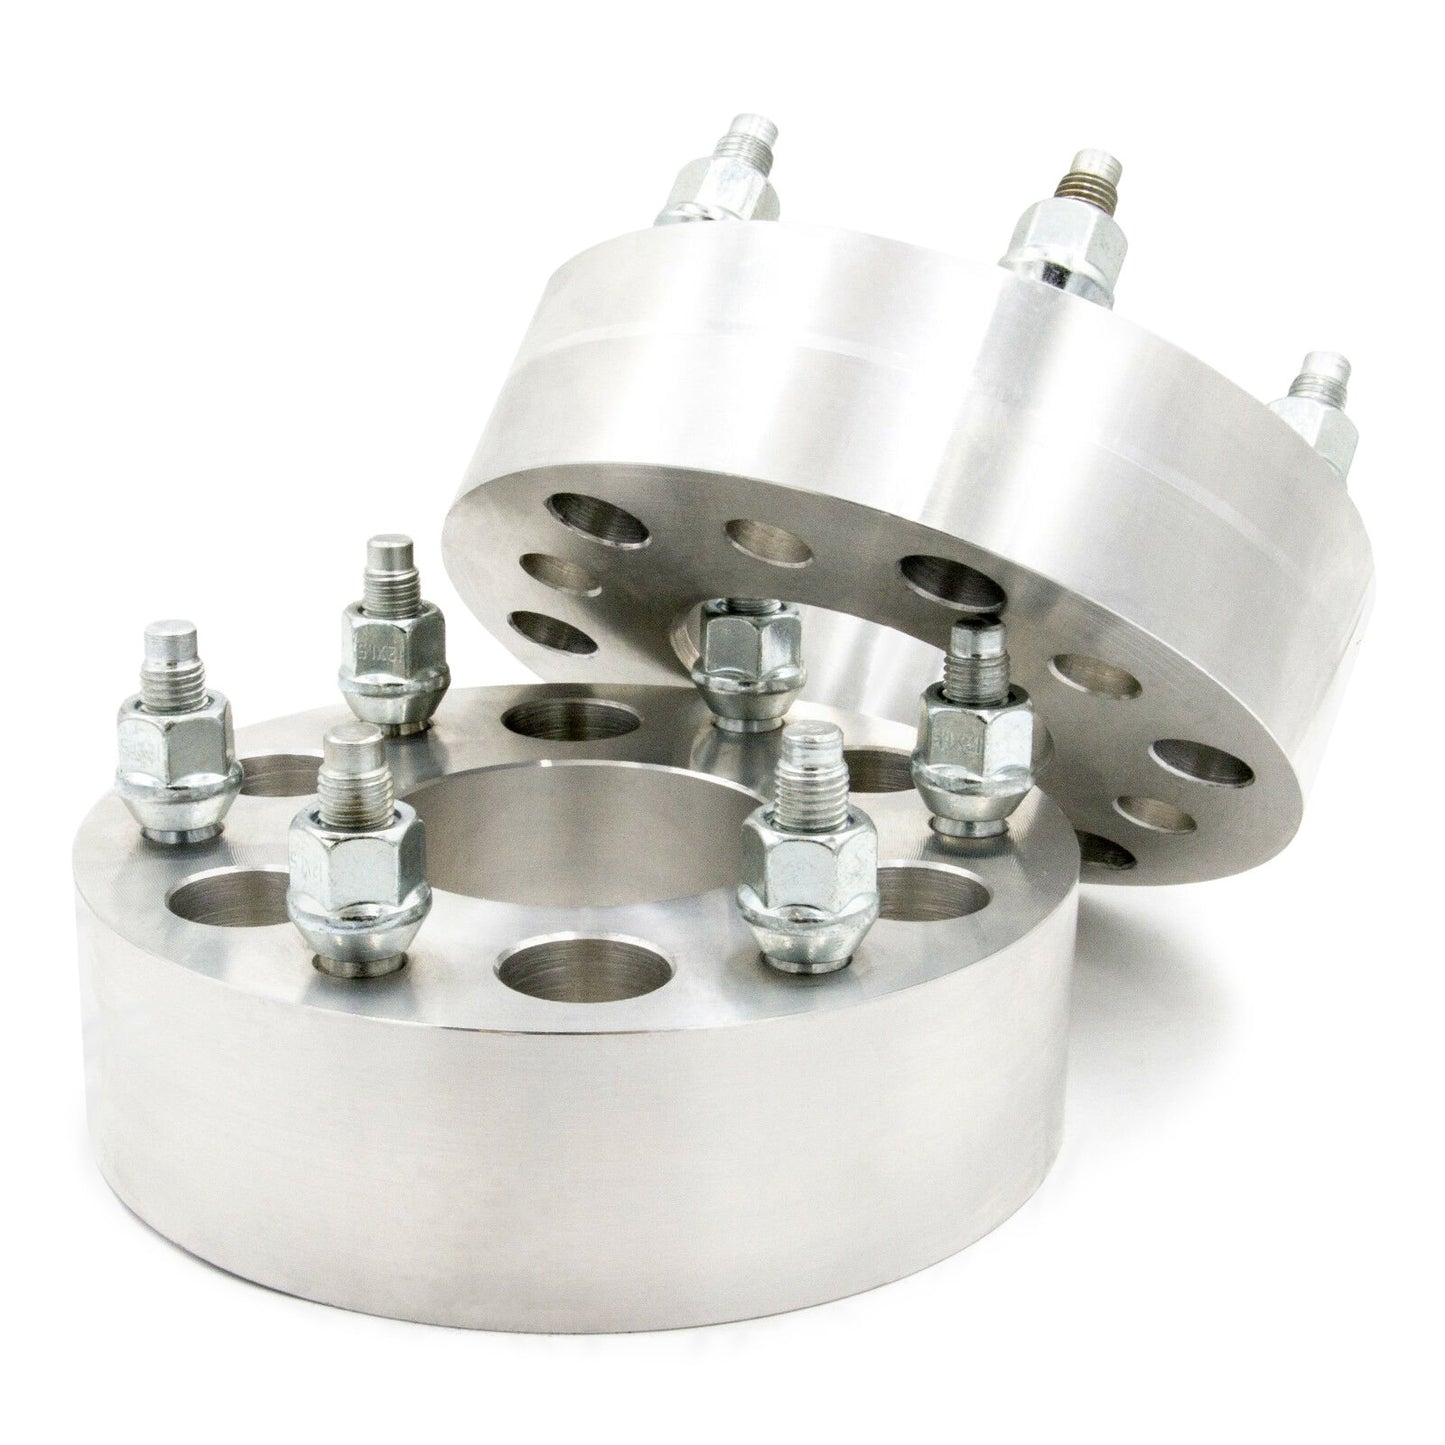 6x135 Wheel Spacers - Thickness: 3/4"- 4"